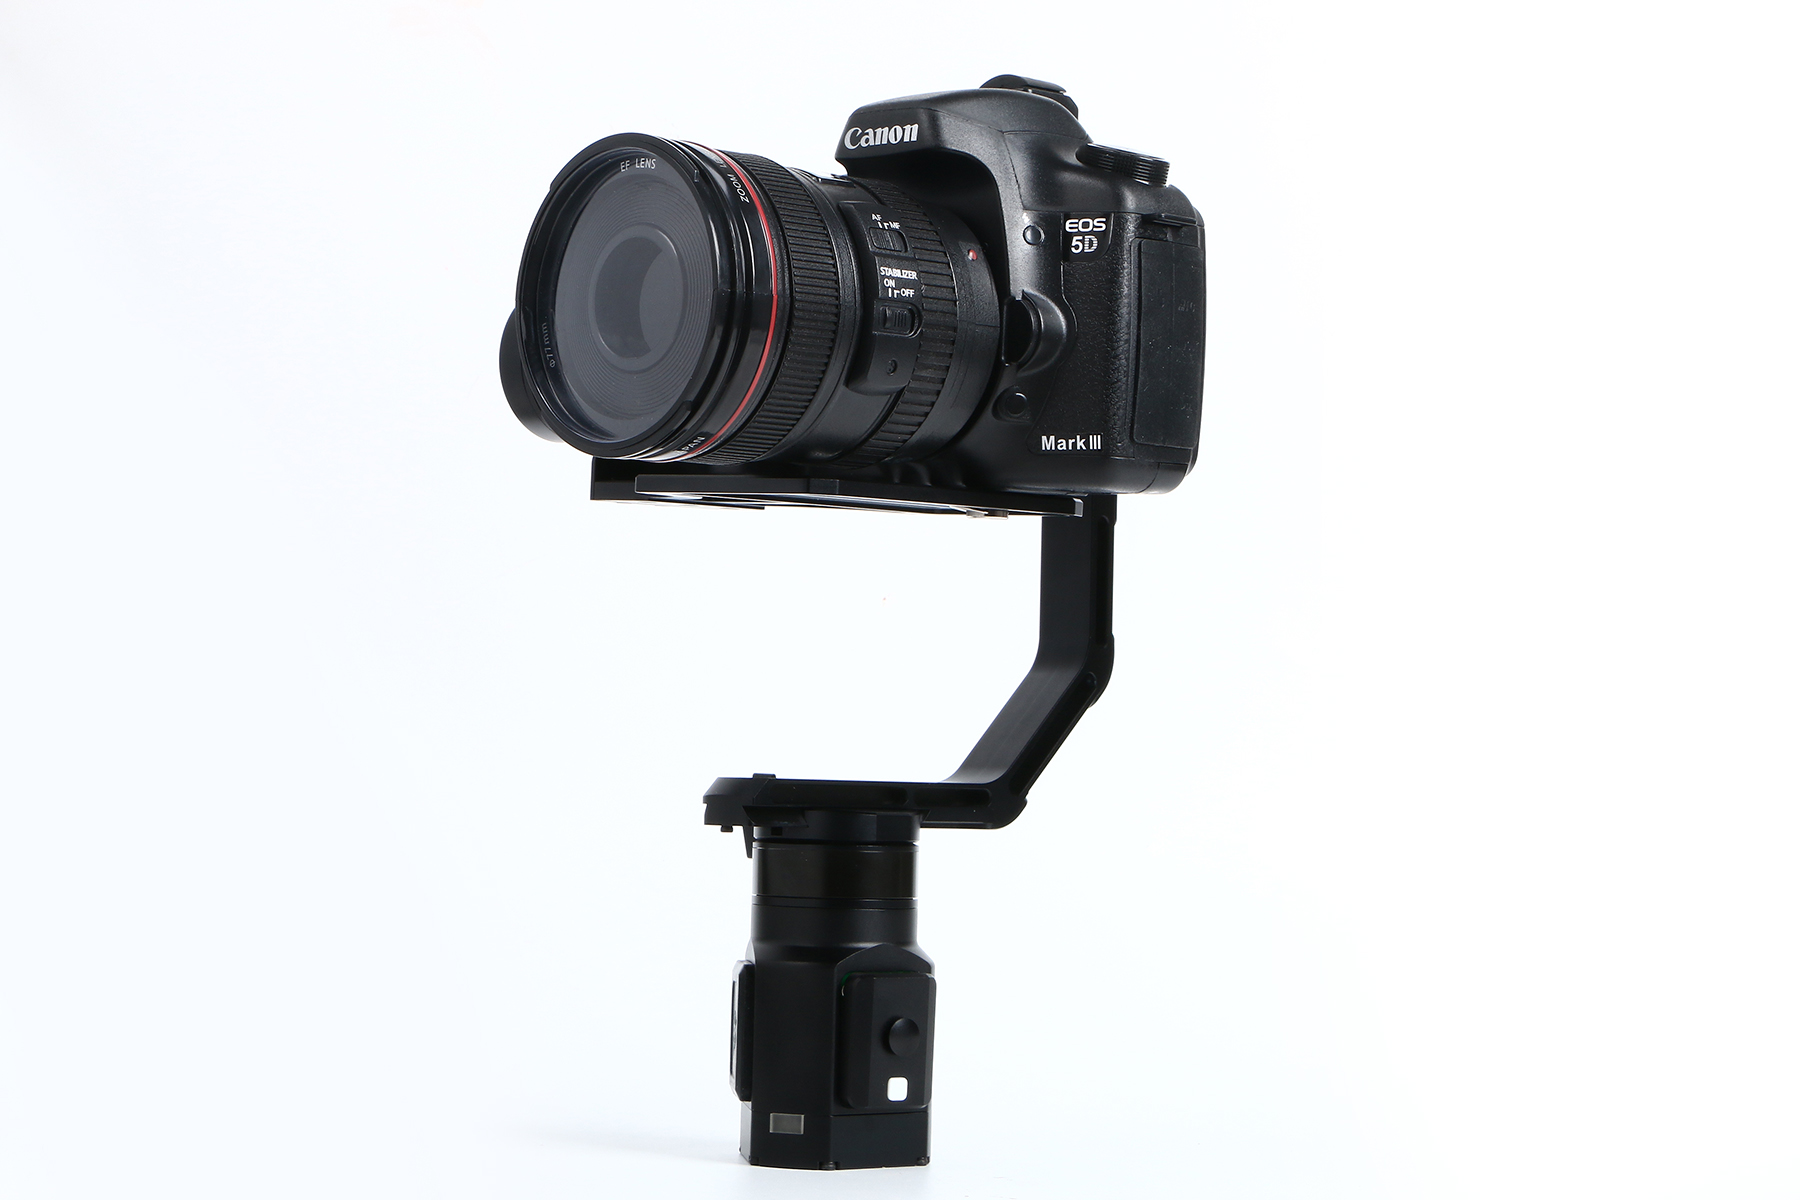 3-Axis Gimbal Handheld Stabilizer for small DSLR Cameras